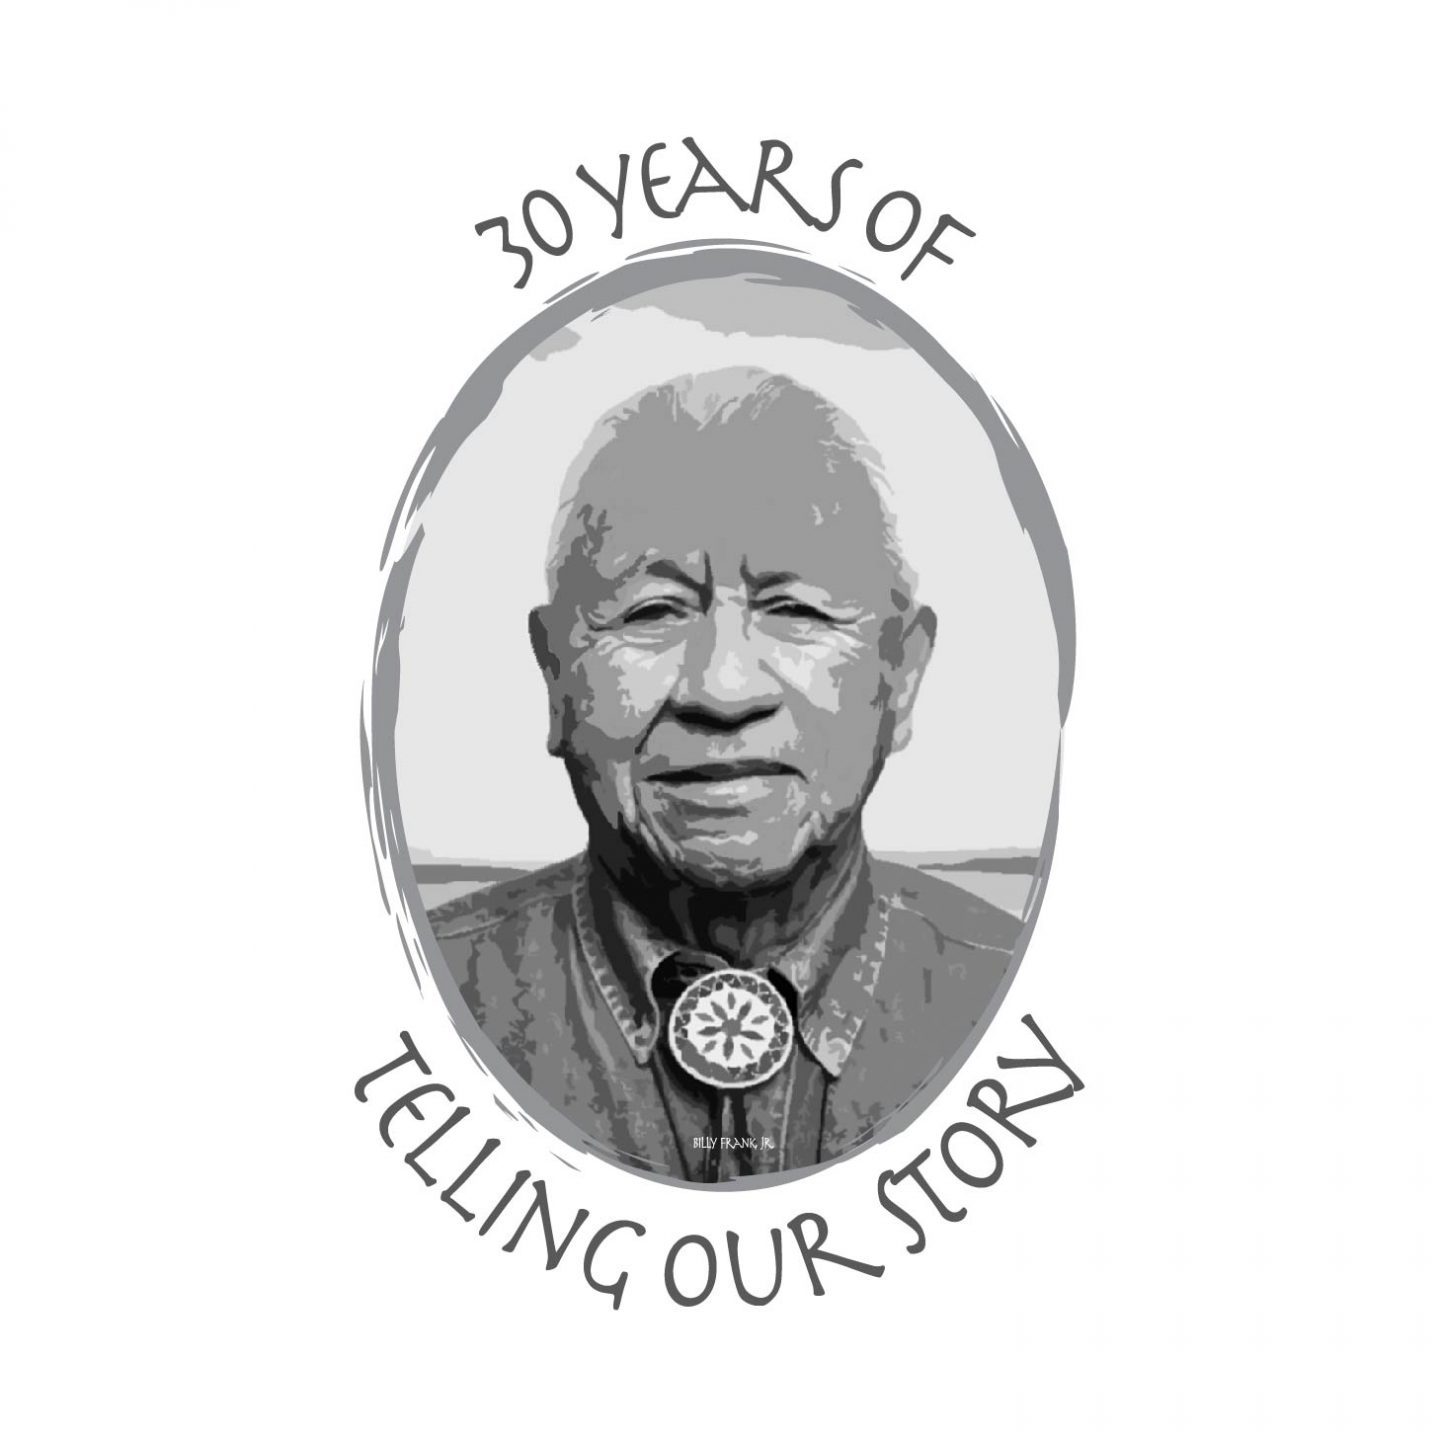 30 Years of Telling Our Story - the image shows a stylized picture of an older indigenous man in grayscale